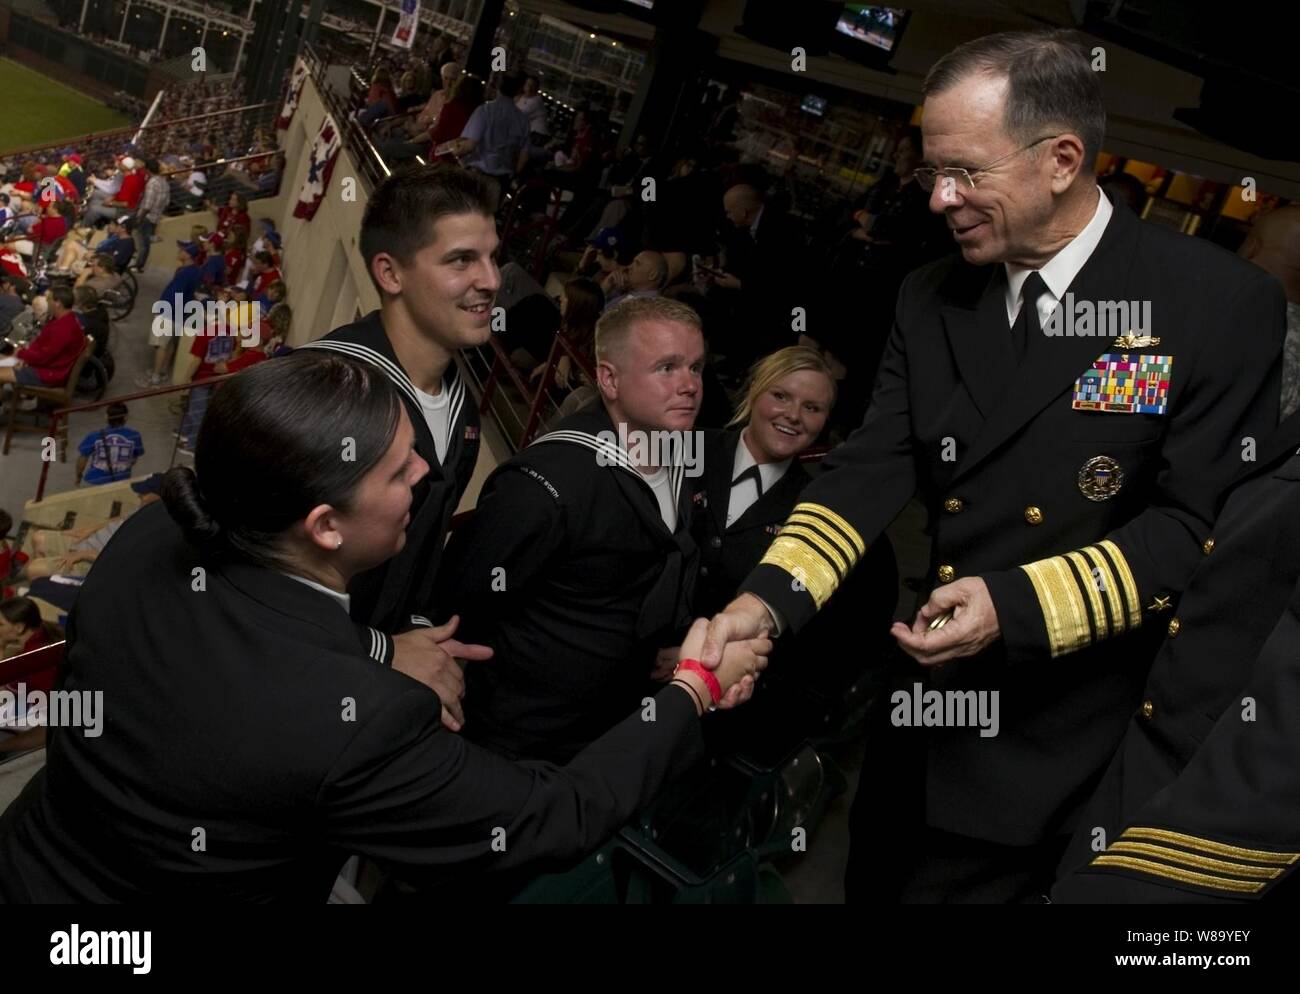 Chairman of the Joint Chiefs of Staff Adm. Mike Mullen greets Navy sailors at Game 4 of the 106th World Series between the San Francisco Giants and Texas Rangers in Arlington, Texas, on Oct. 31, 2010.  Major League Baseball dedicated the game to the Welcome Back Veterans initiative that honors and encourages support of returning military members and their families. Stock Photo